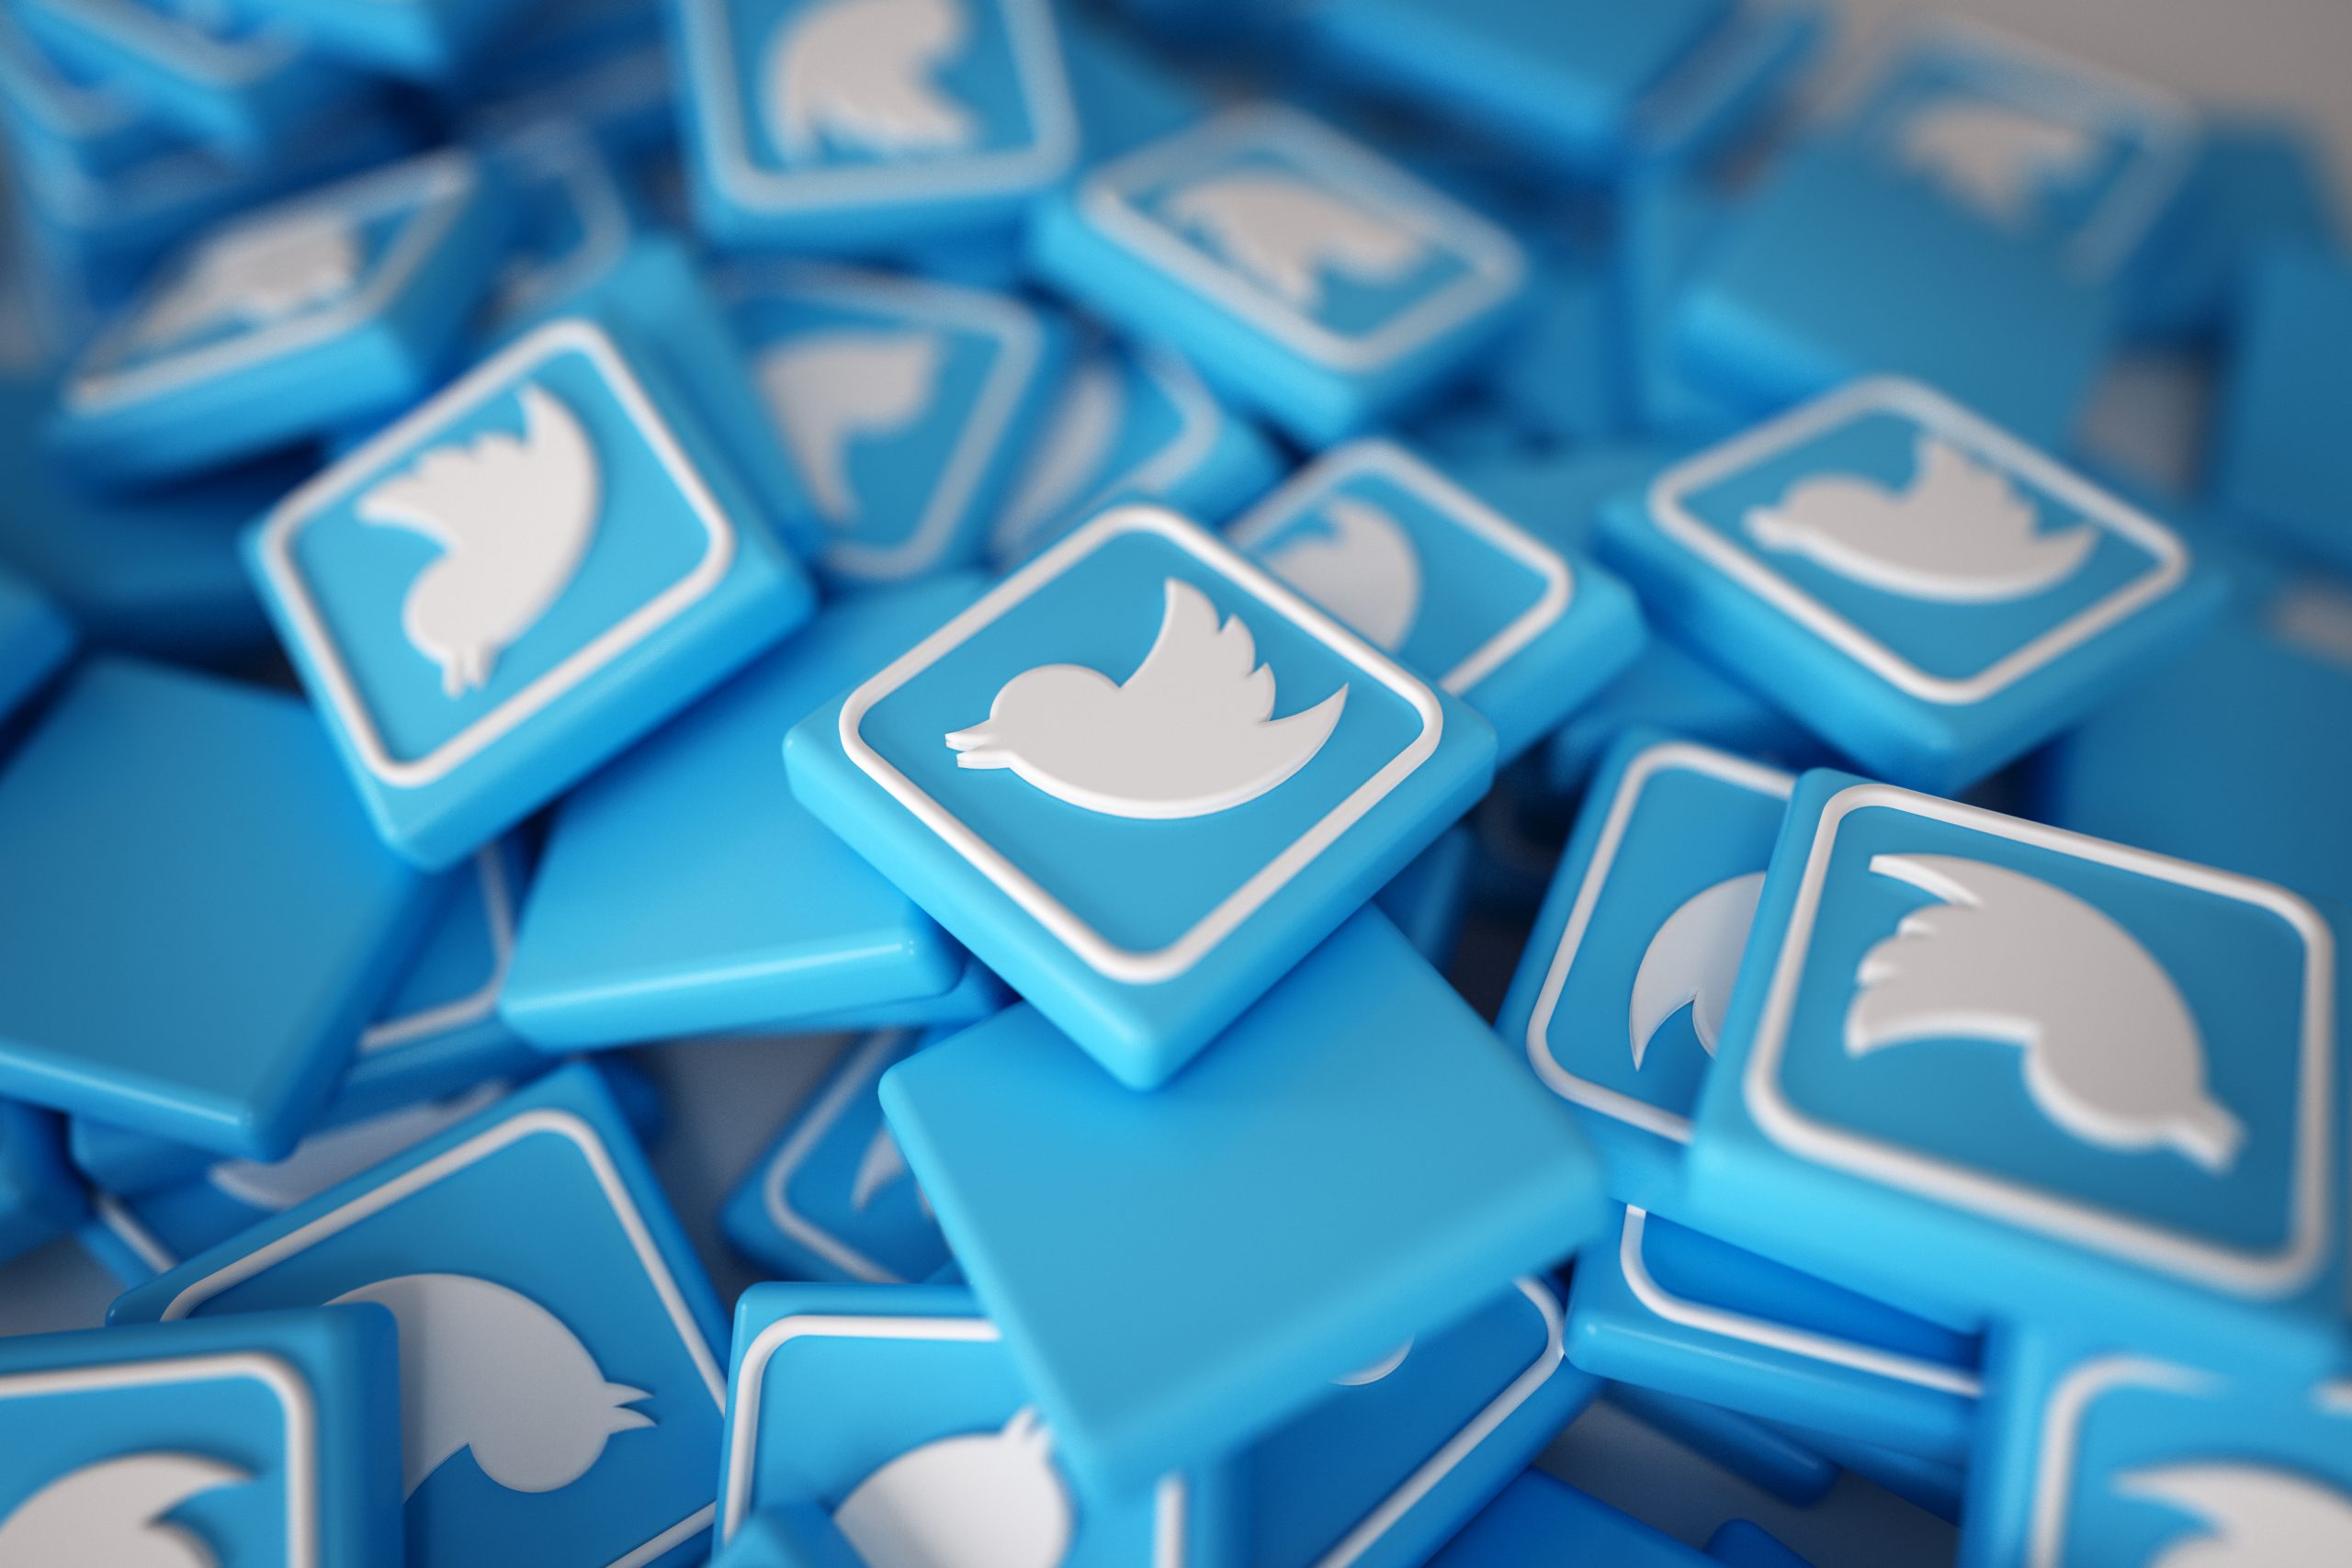 Twitter logos in a pile